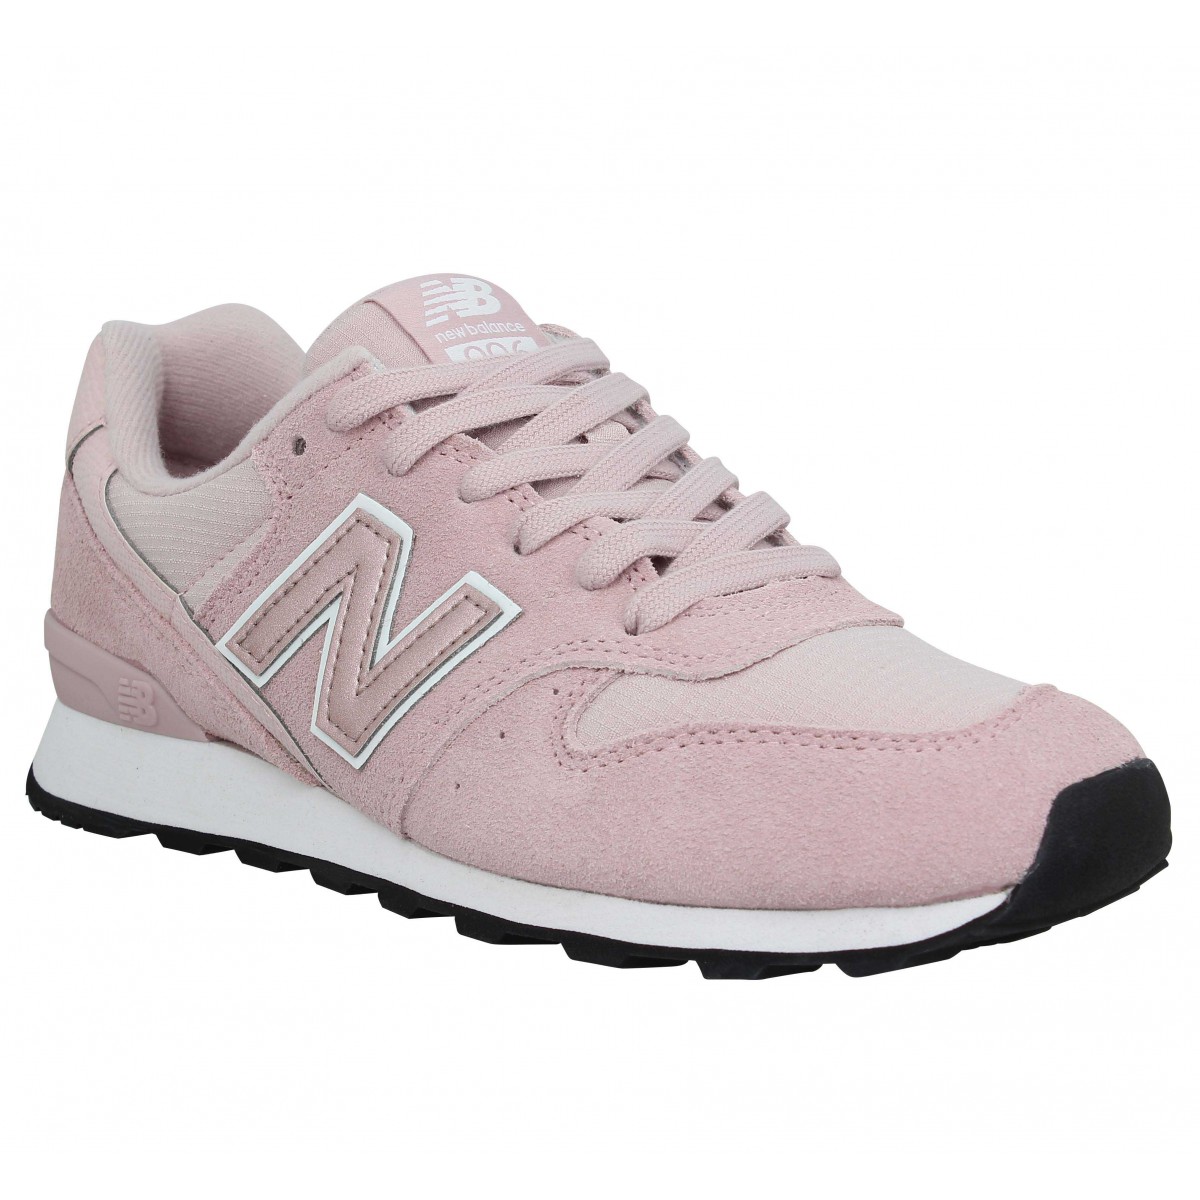 new balance homme rose, OFF 71%,where to buy!